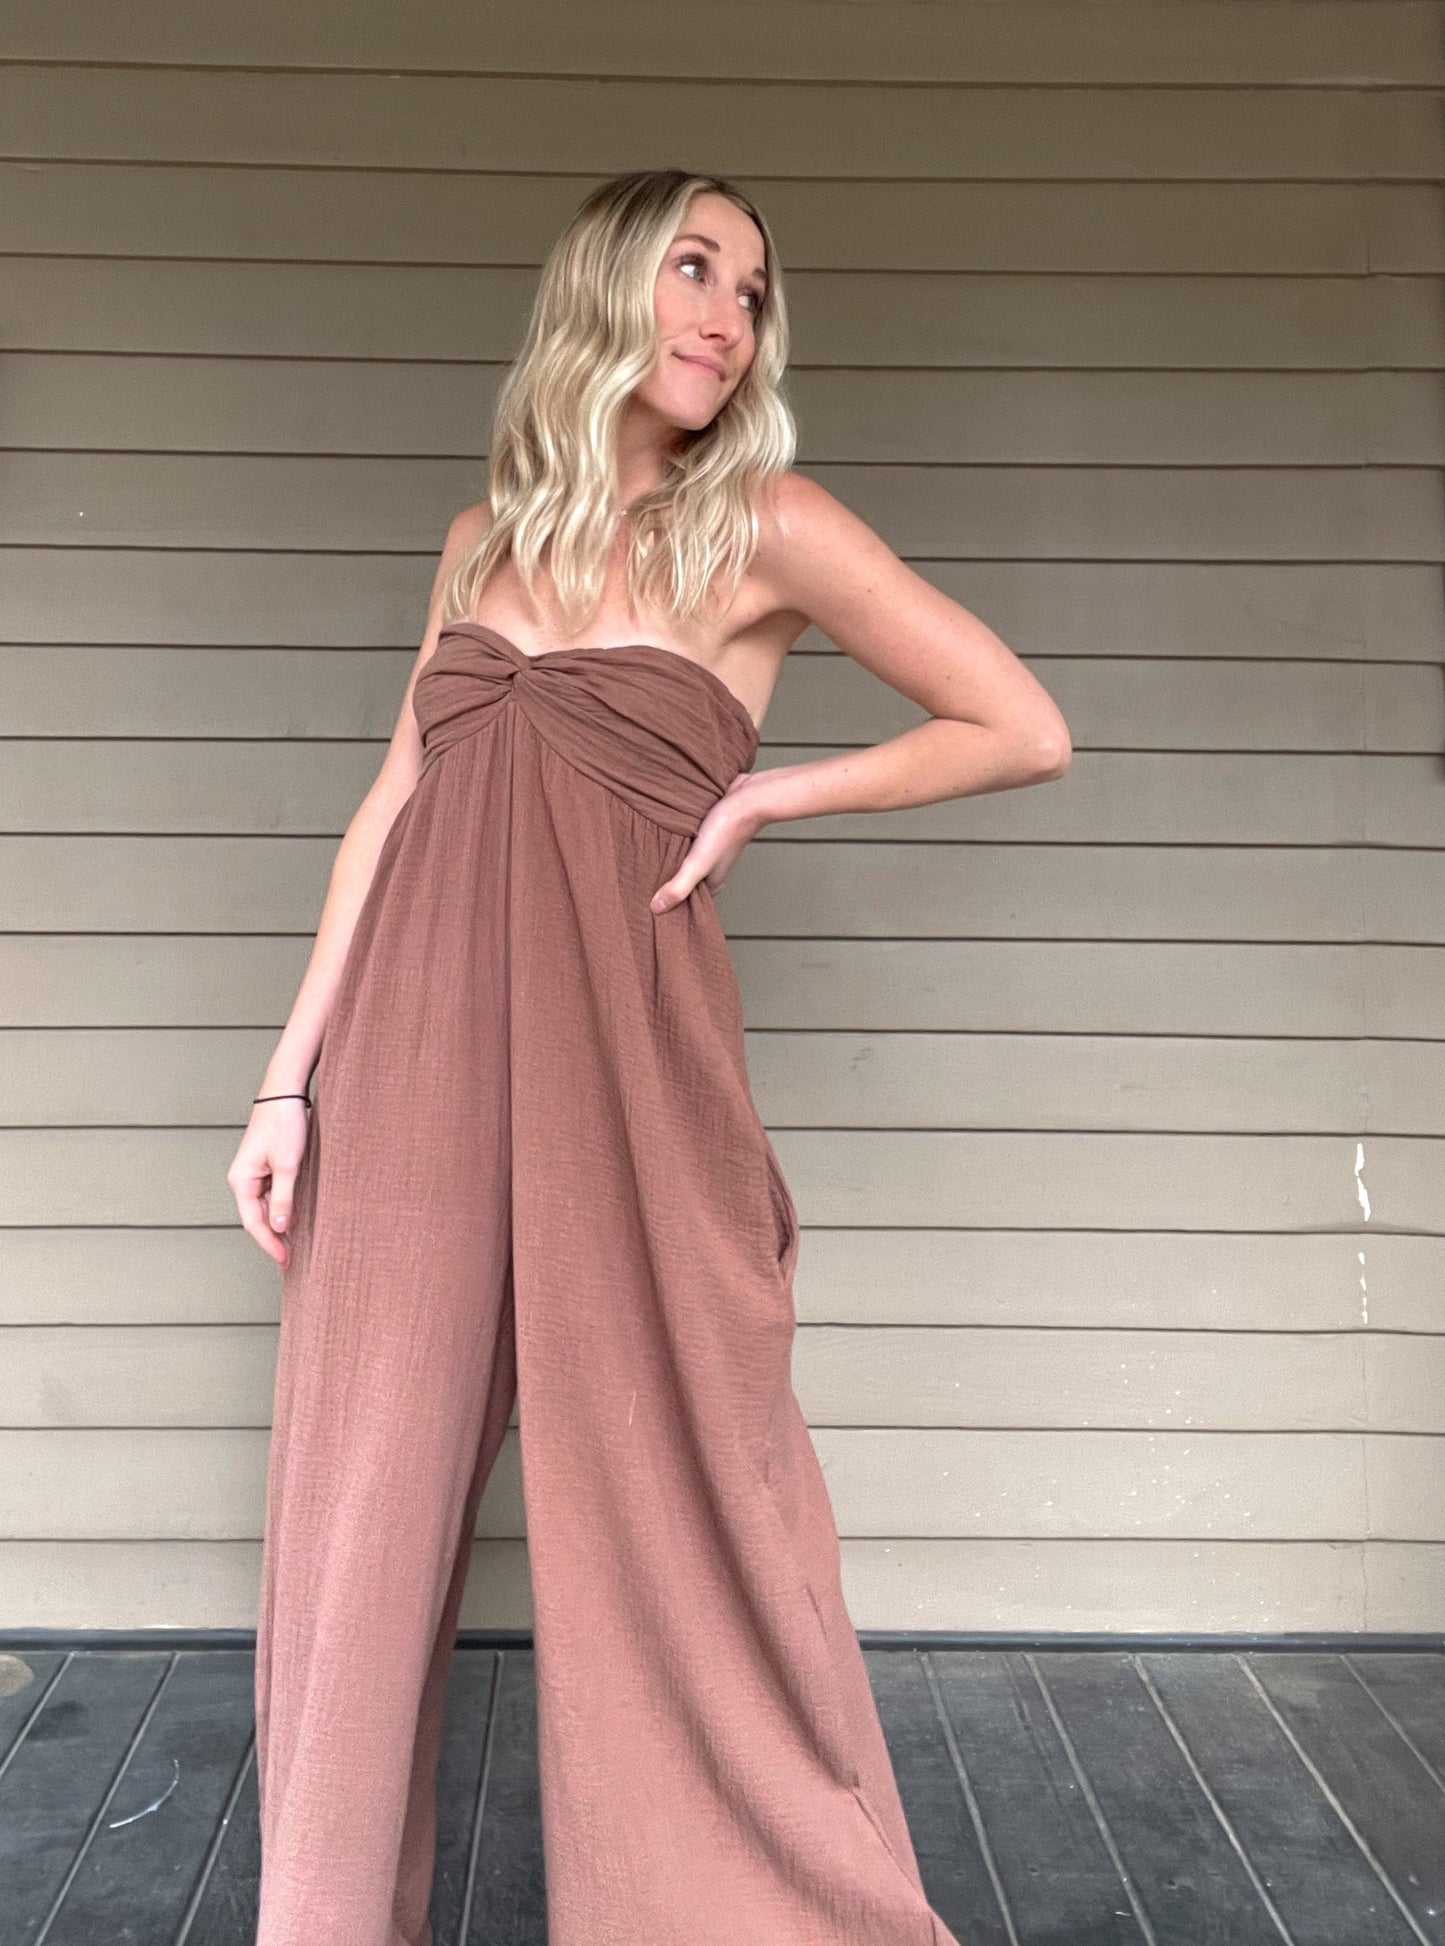 Moroccan Strapless Jumpsuit - Mocha  Wide leg strapless jumpsuit Twisted bust Wide leg Pockets 100% Cotton Color: Mocha Step out in style with this Moroccan Strapless Jumpsuit. This wide leg boho jumpsuit provides elegance and comfort. Crafted from quality materials, this jumpsuit will make a statement while keeping you comfortable throughout the day. Perfect for any special occasion.